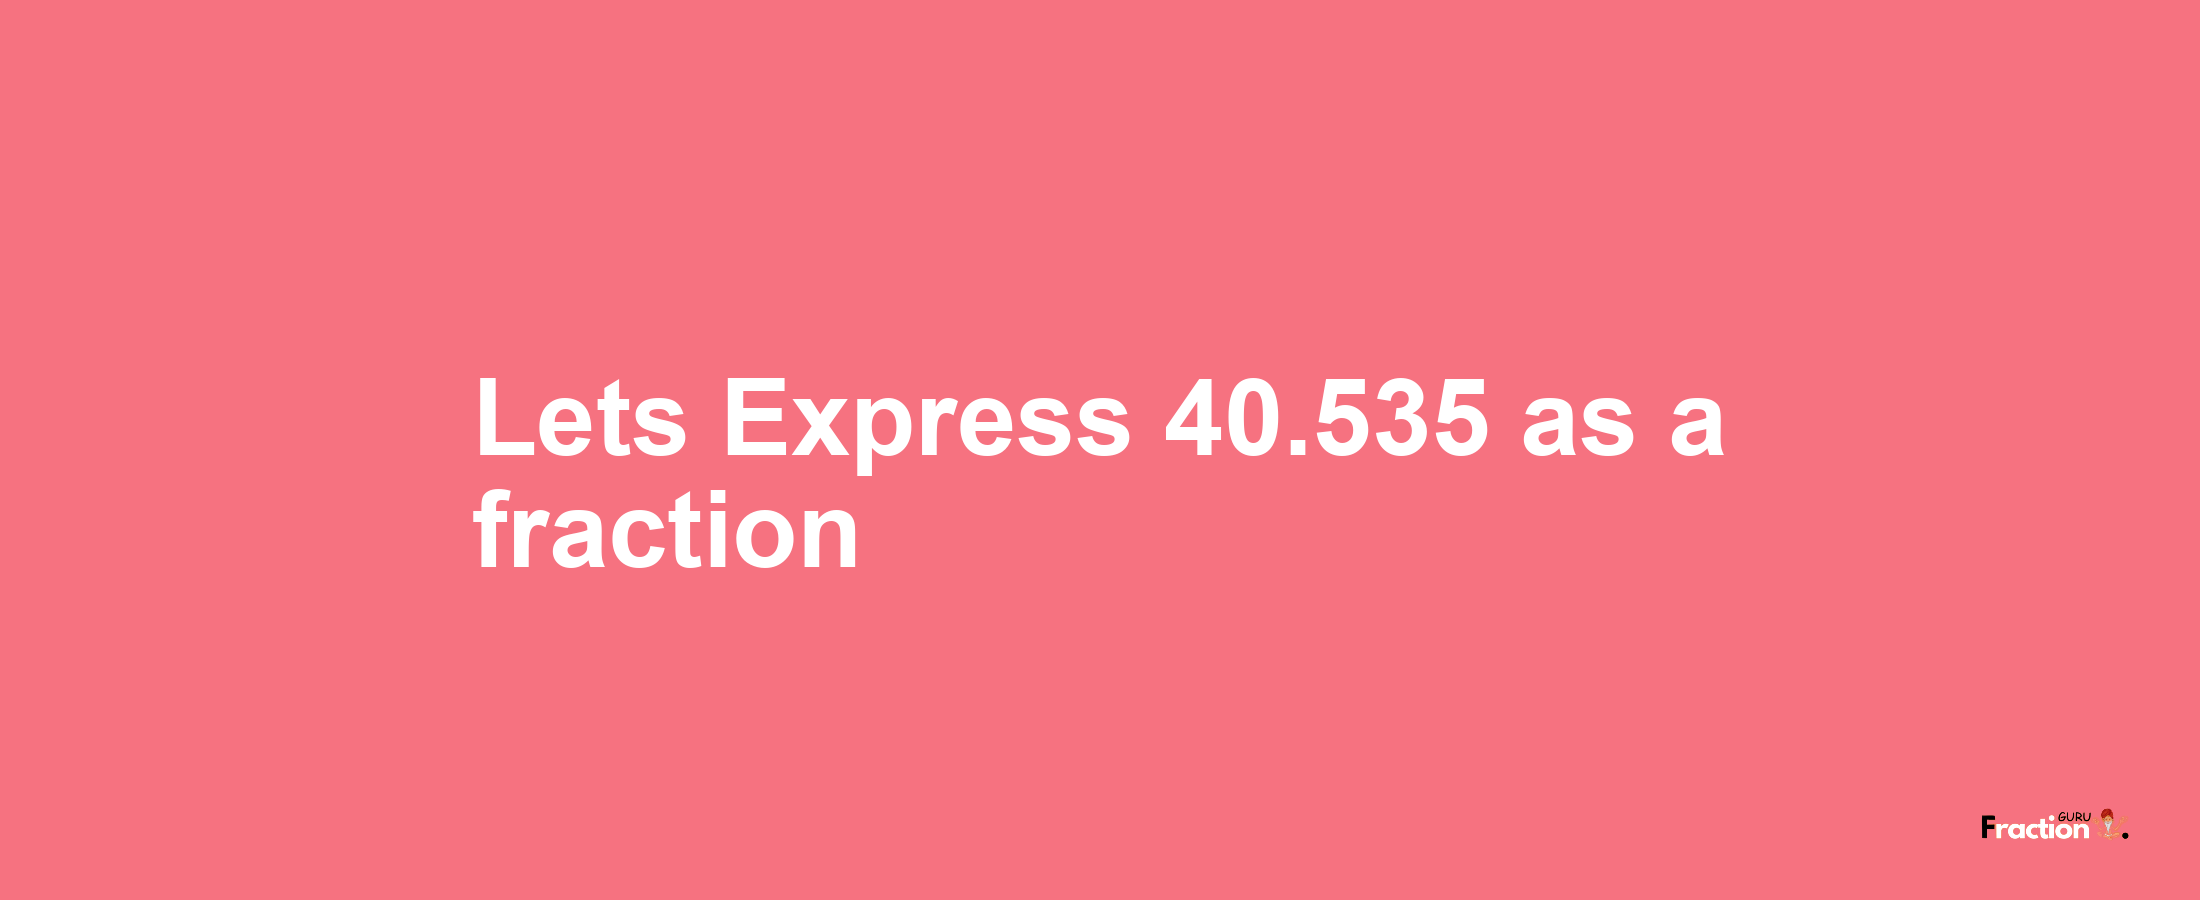 Lets Express 40.535 as afraction